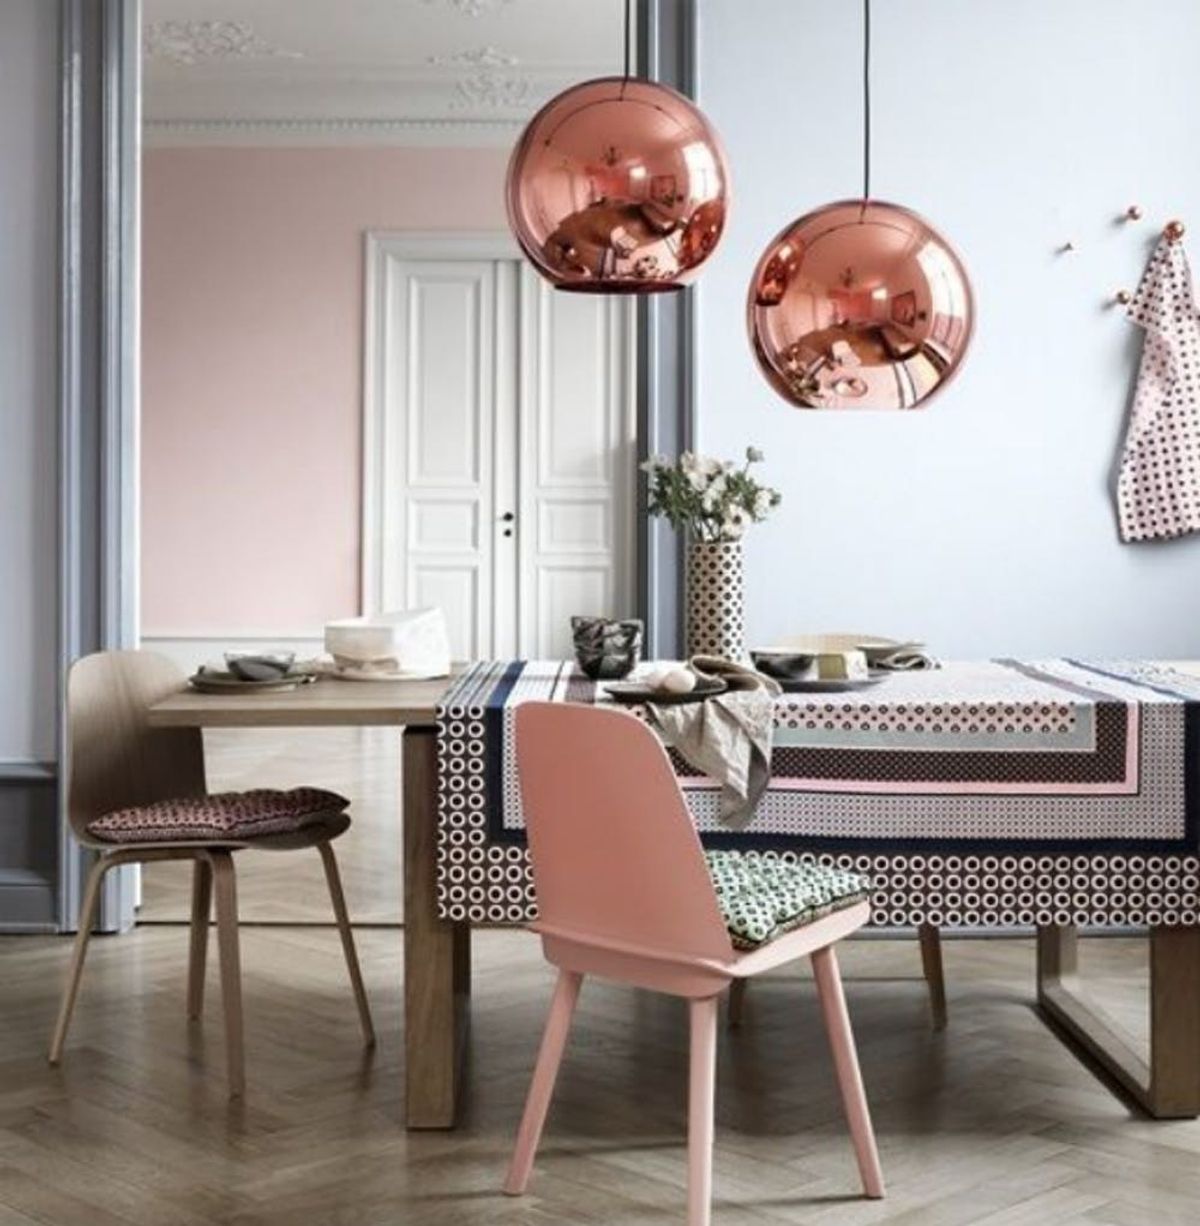 Bring in the Bling: 20 Ways to Embrace the Metallic Trend in Your Home